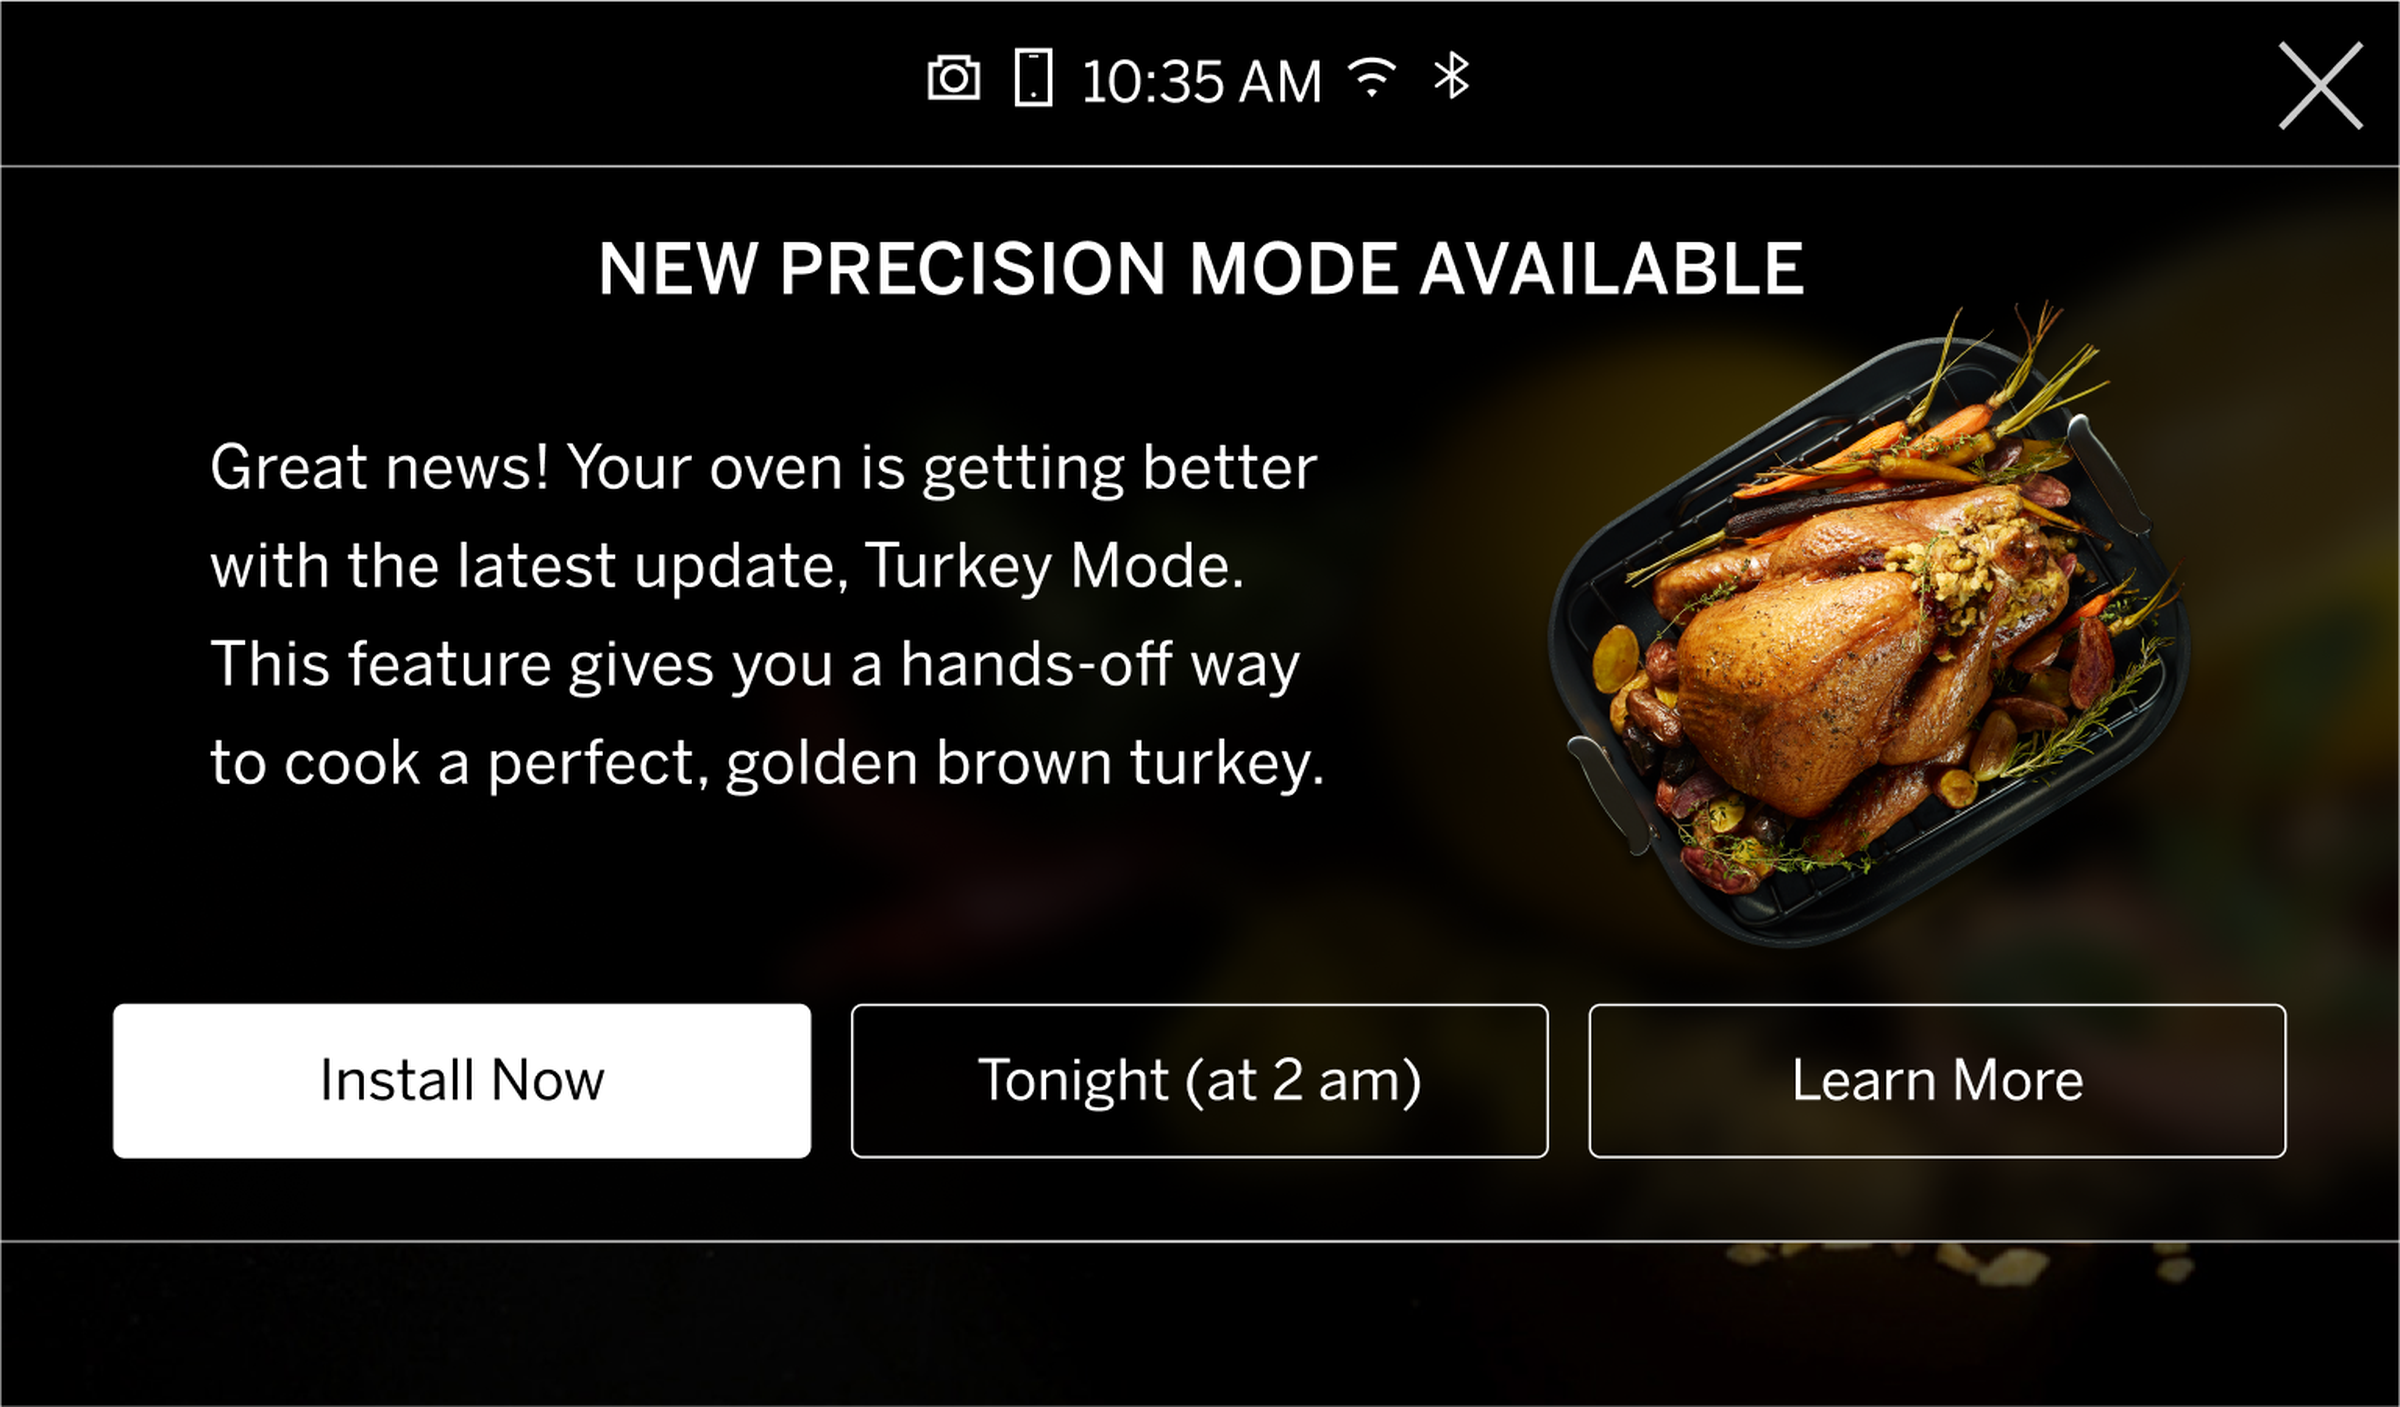 Turkey Mode is part of GE Appliances smart oven’s Precision Cooking programs.